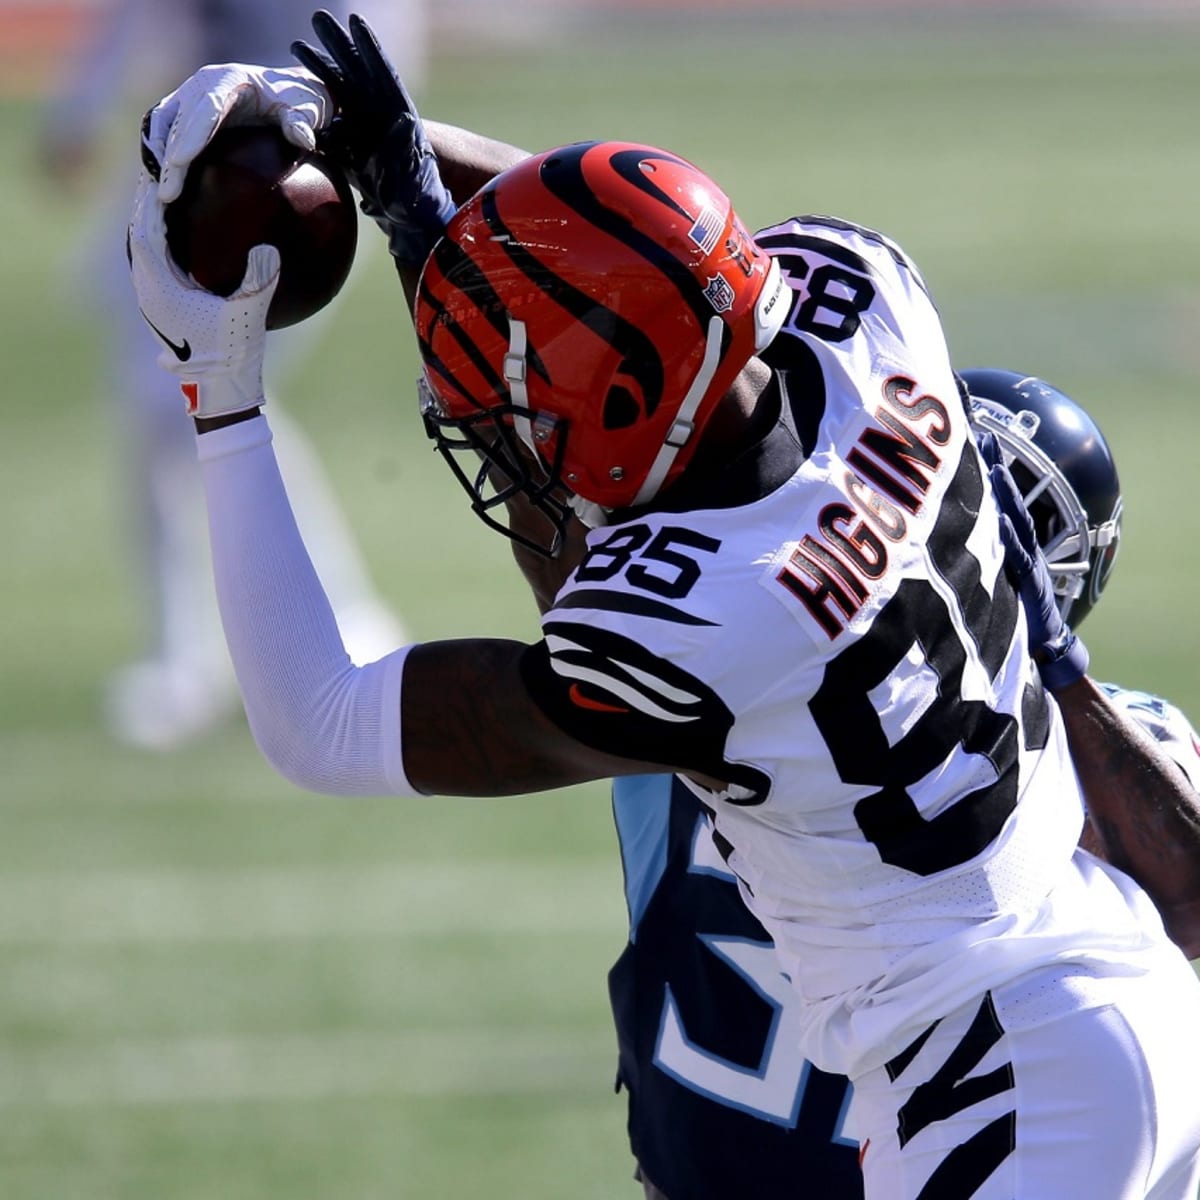 Tee Higgins Notches First Touchdown for Cincinnati Bengals in Super Bowl  LVI - Sports Illustrated Clemson Tigers News, Analysis and More